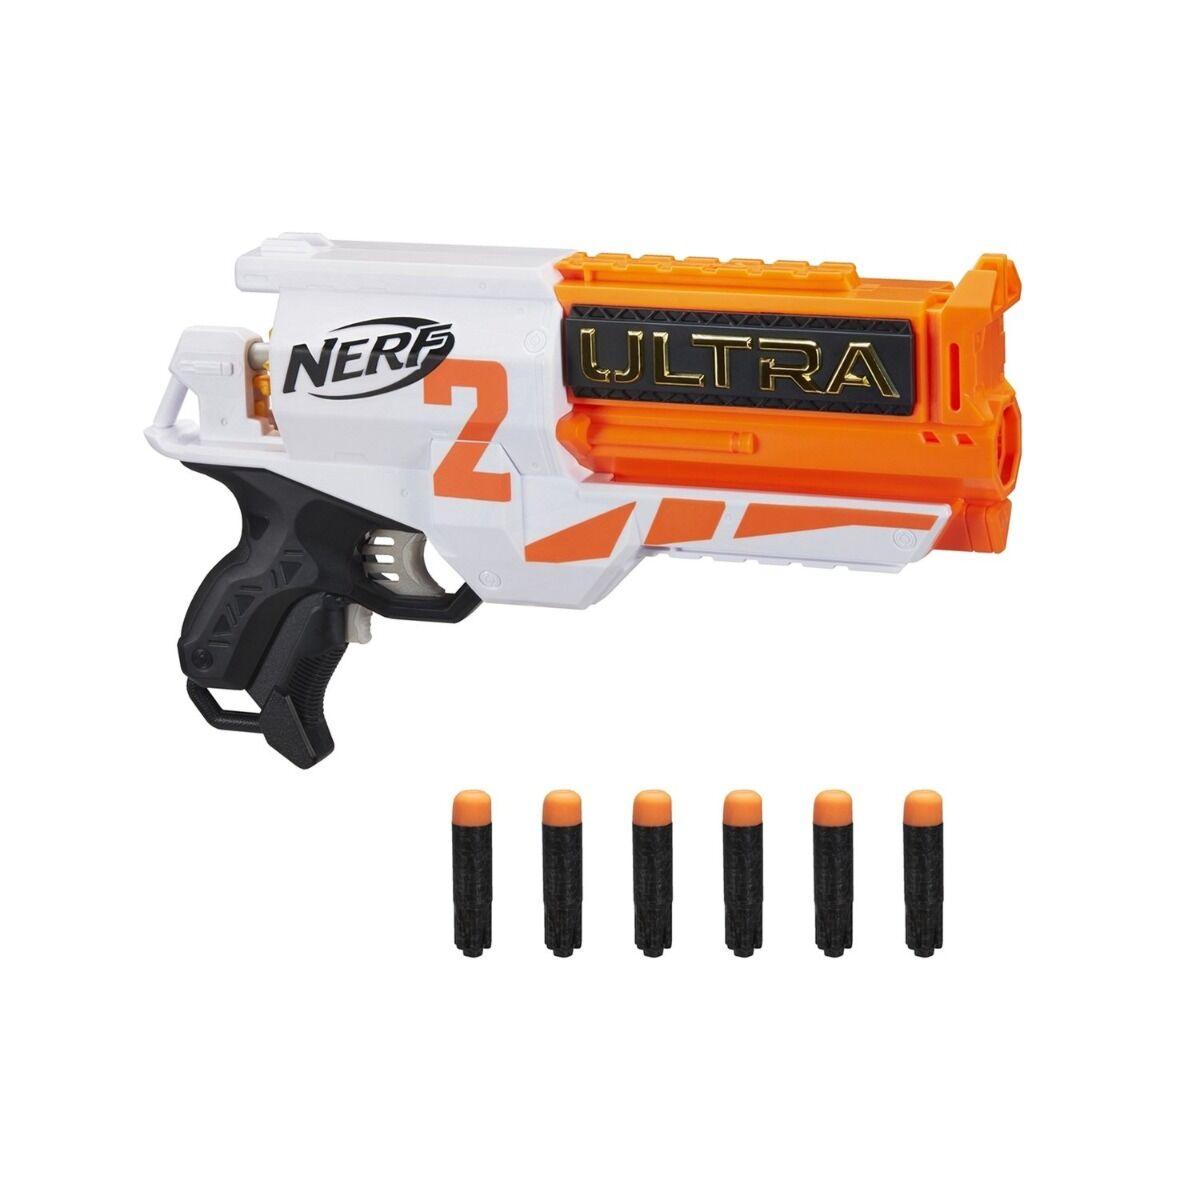 Nerf: Ultra. Two